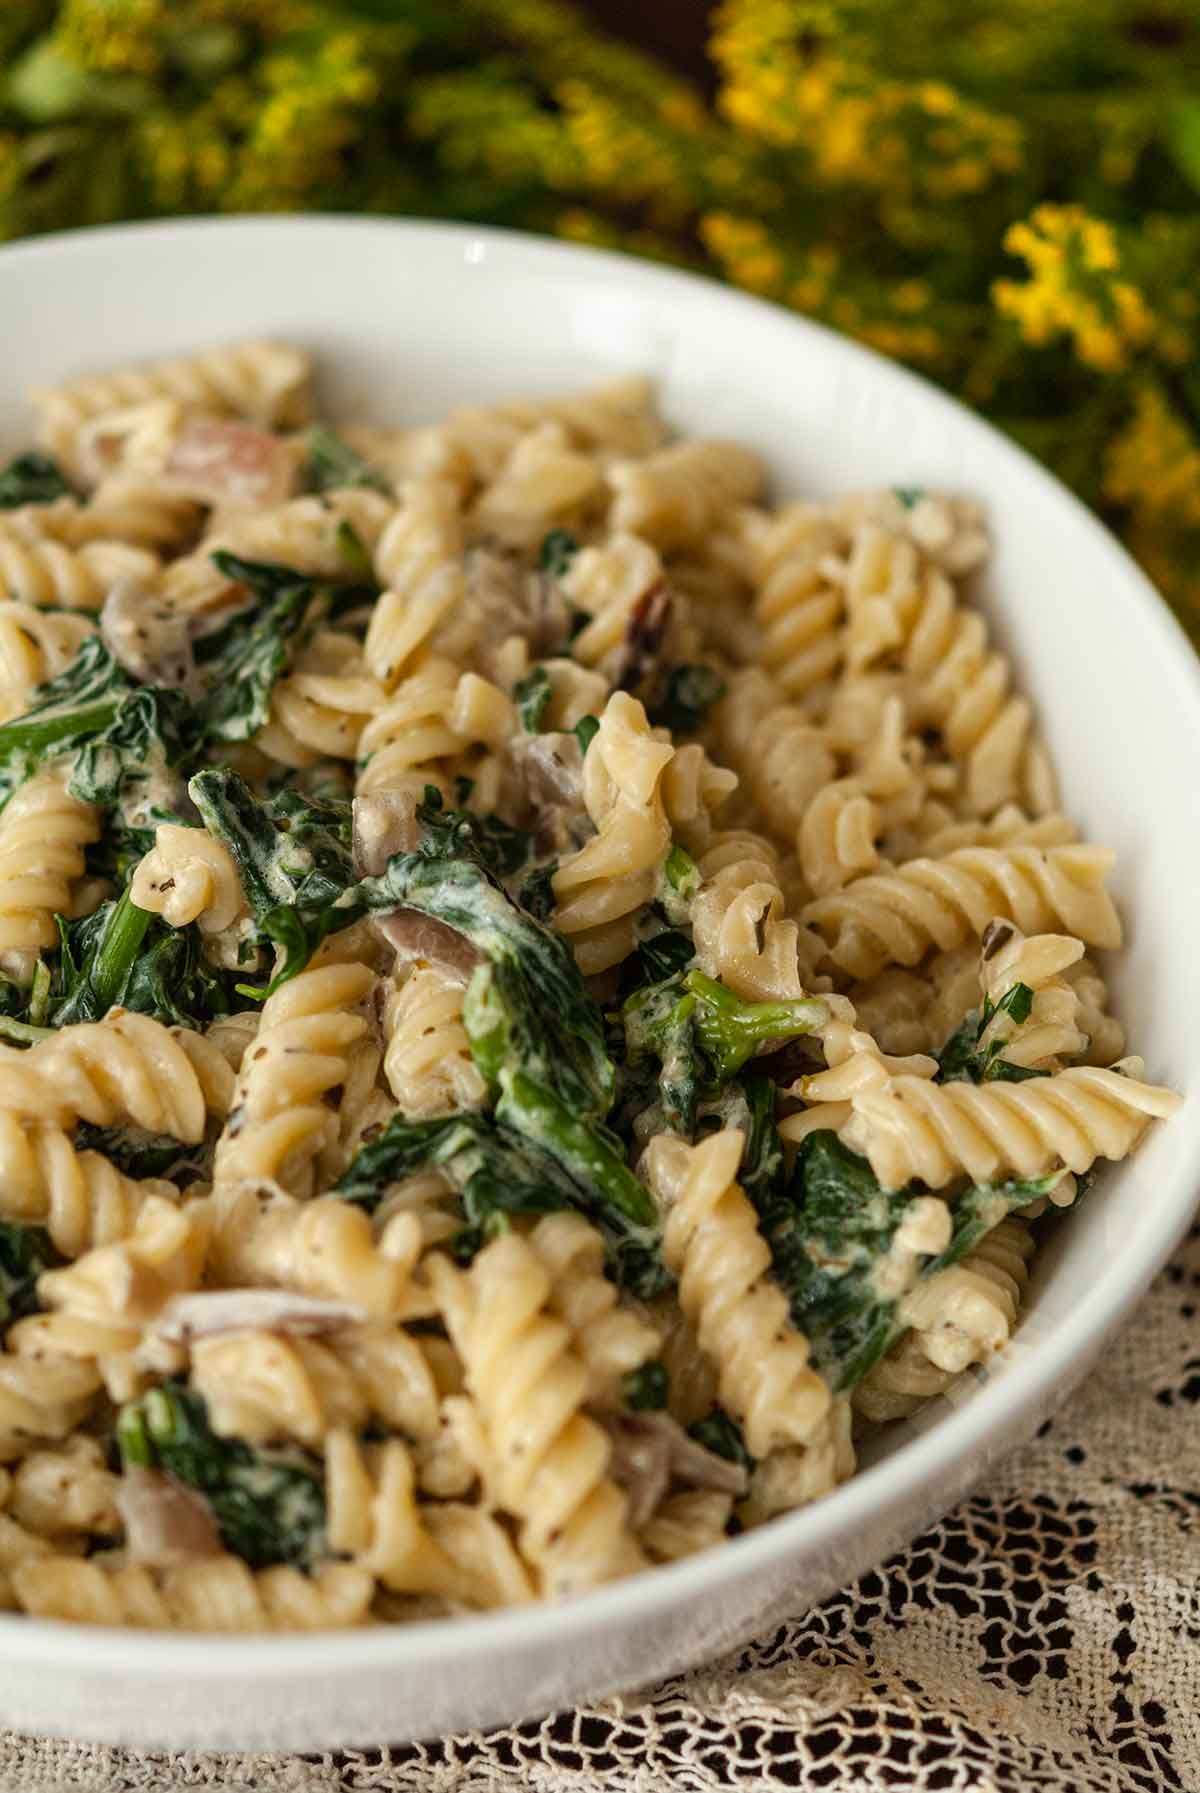 A bowl of pasta with spinach on a table with flowers.